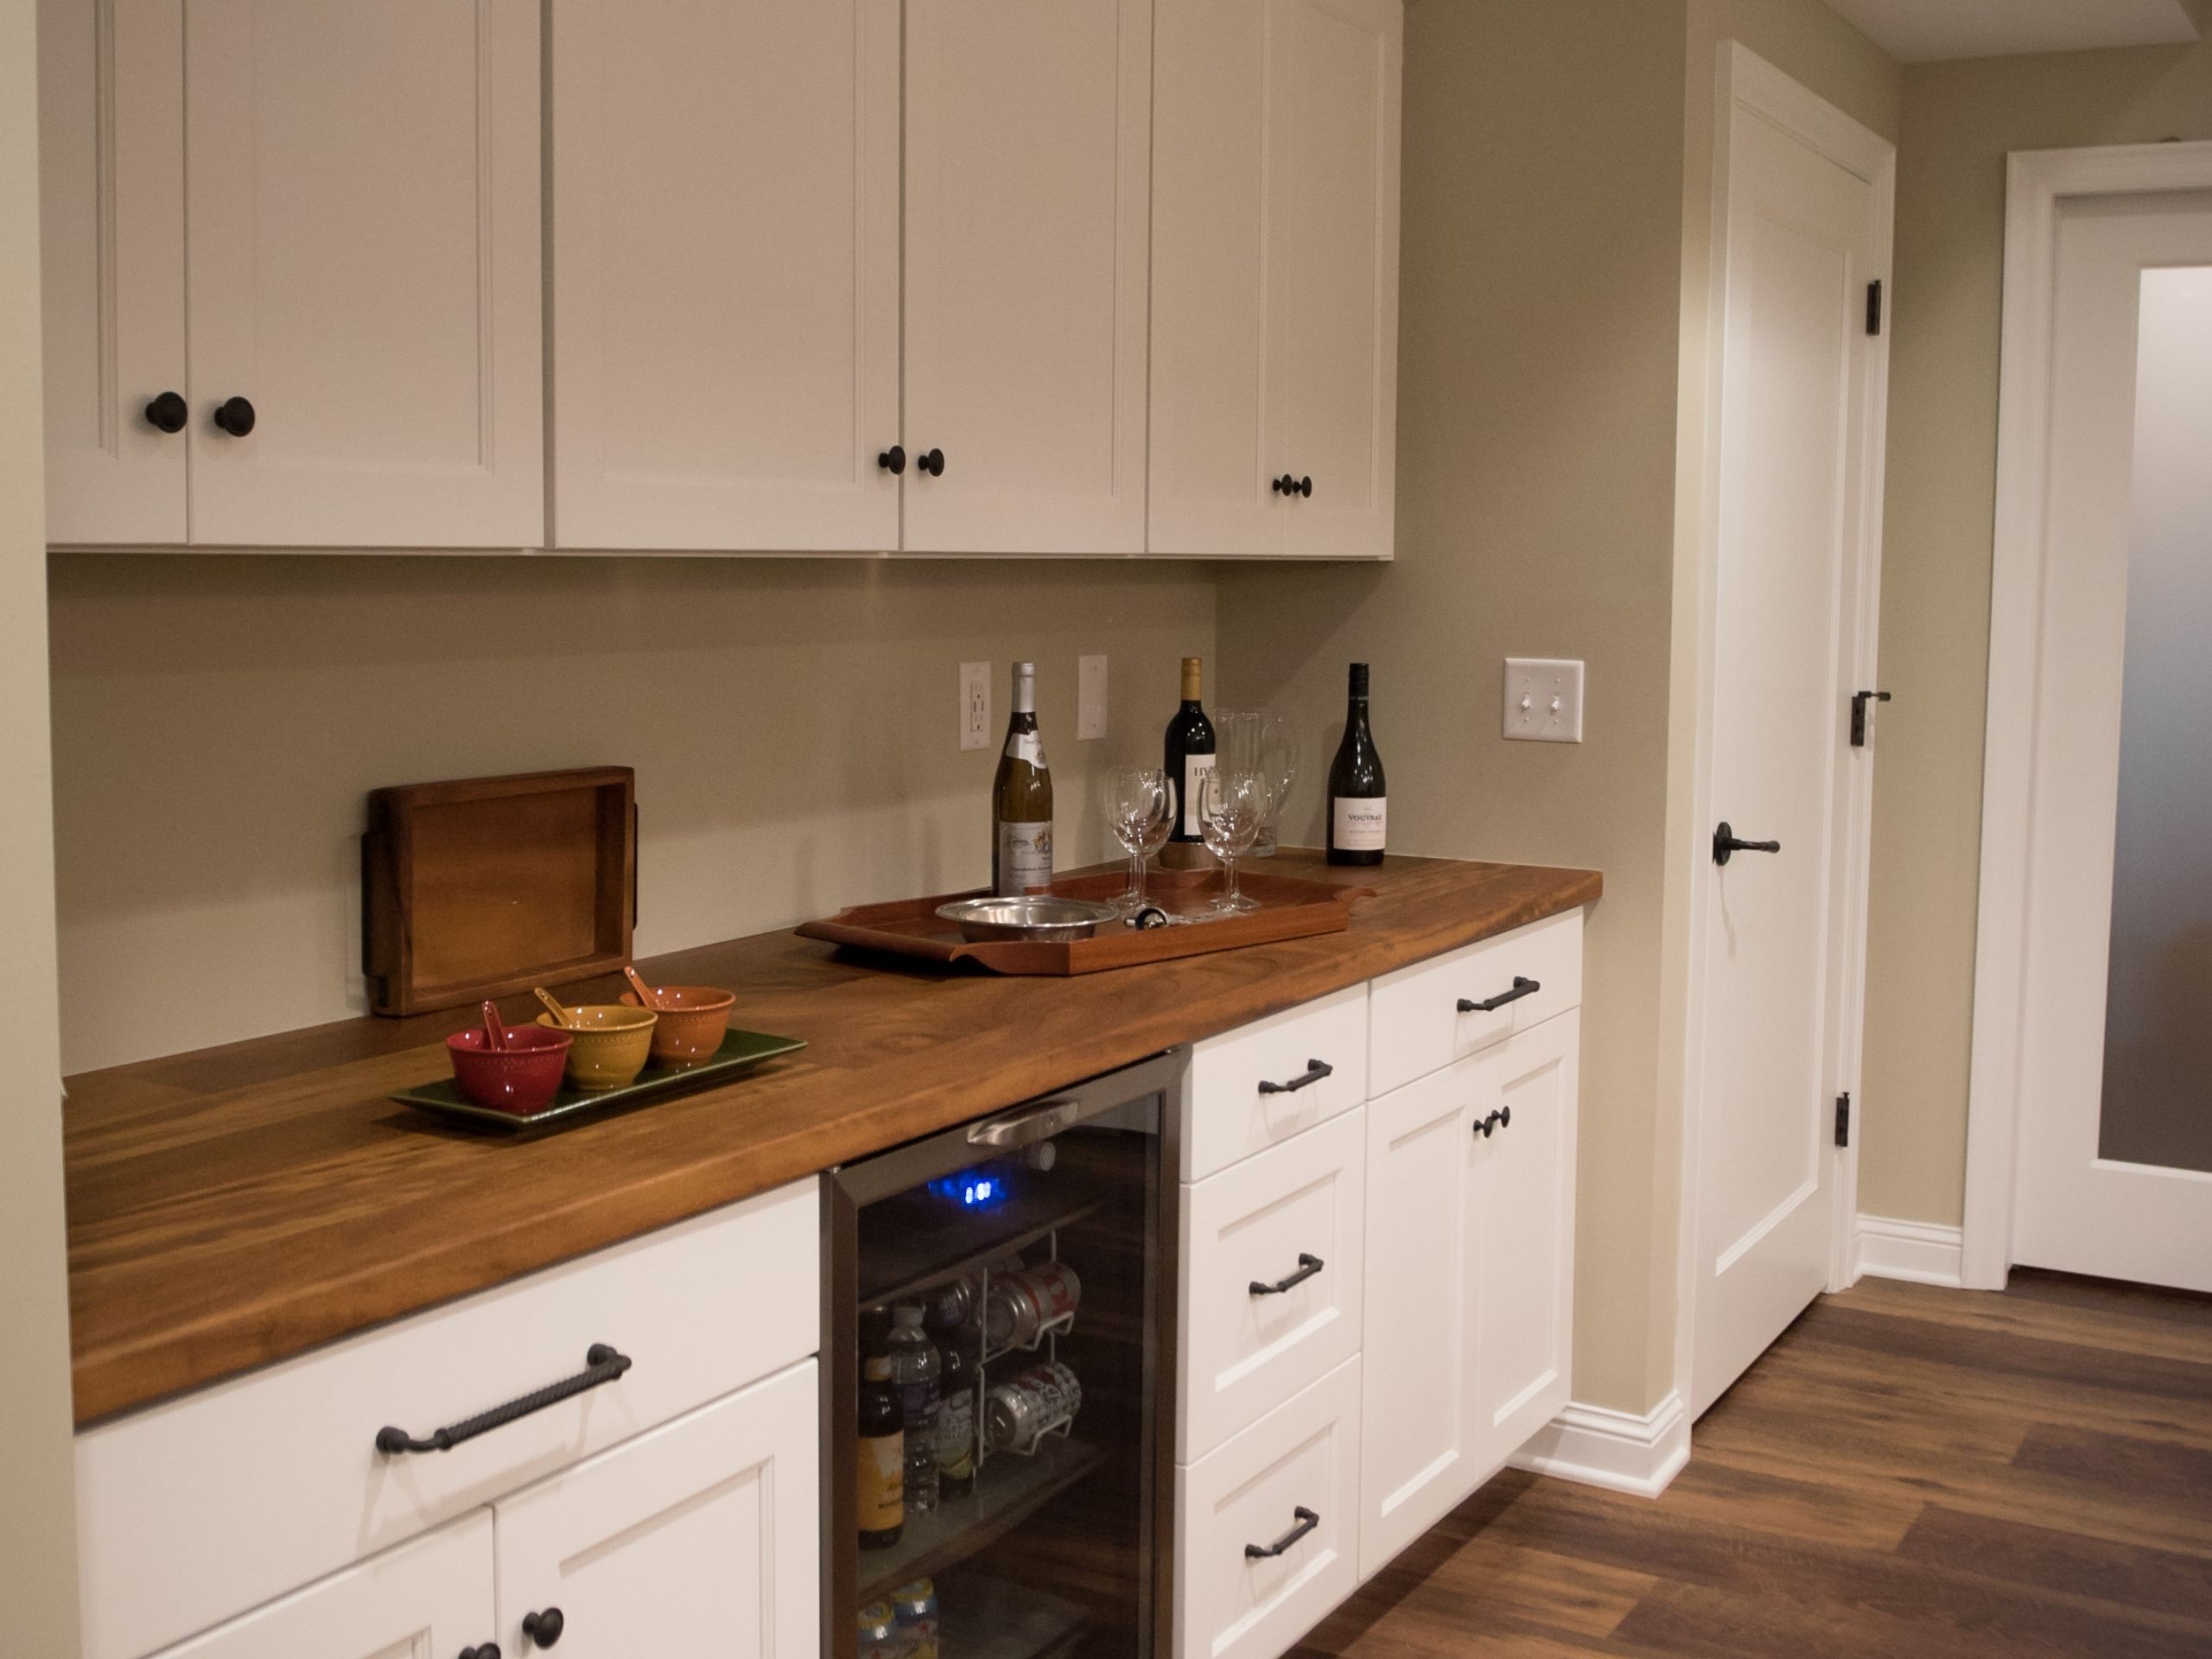 basement remodeling ideas: Basement bar area with wine fridge, white cabinets and wine and glasses on counter